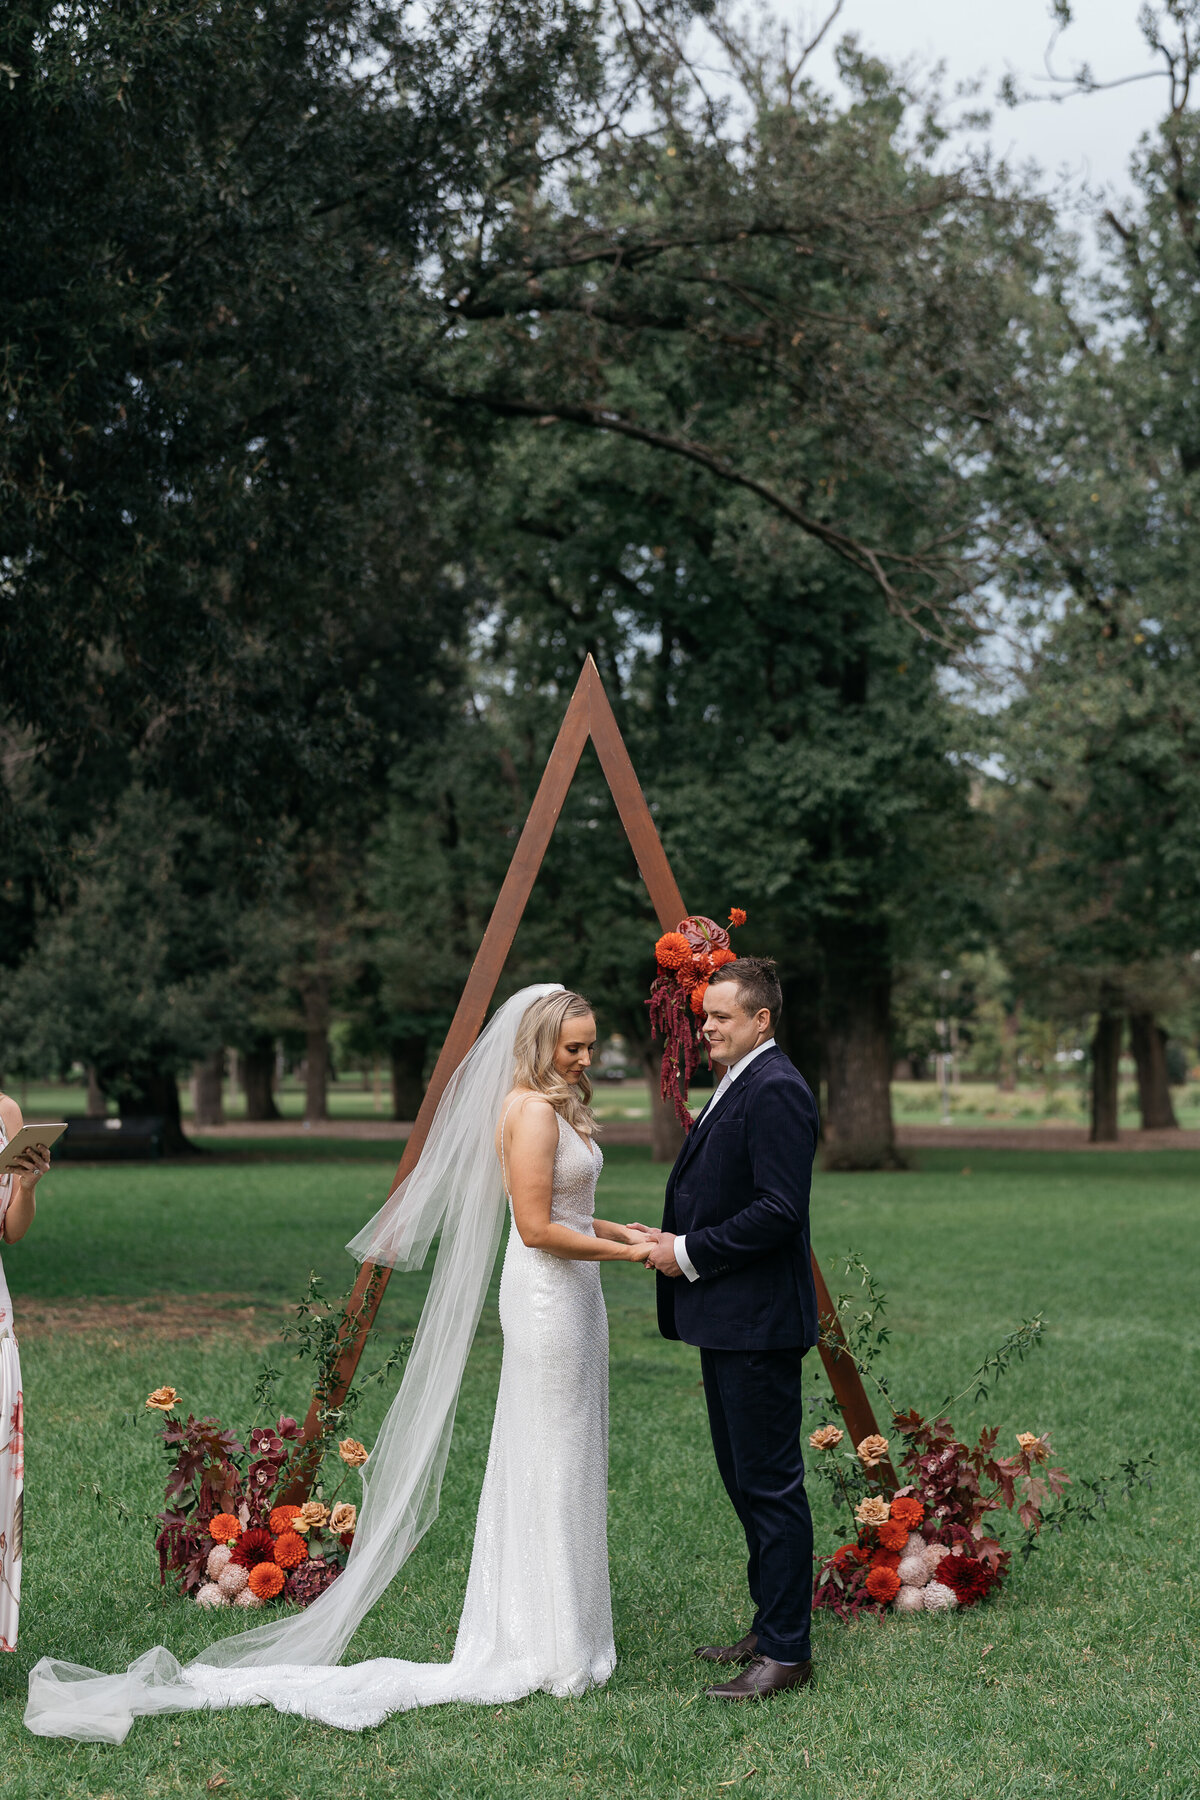 Courtney Laura Photography, Melbourne Wedding Photographer, Fitzroy Nth, 75 Reid St, Cath and Mitch-355